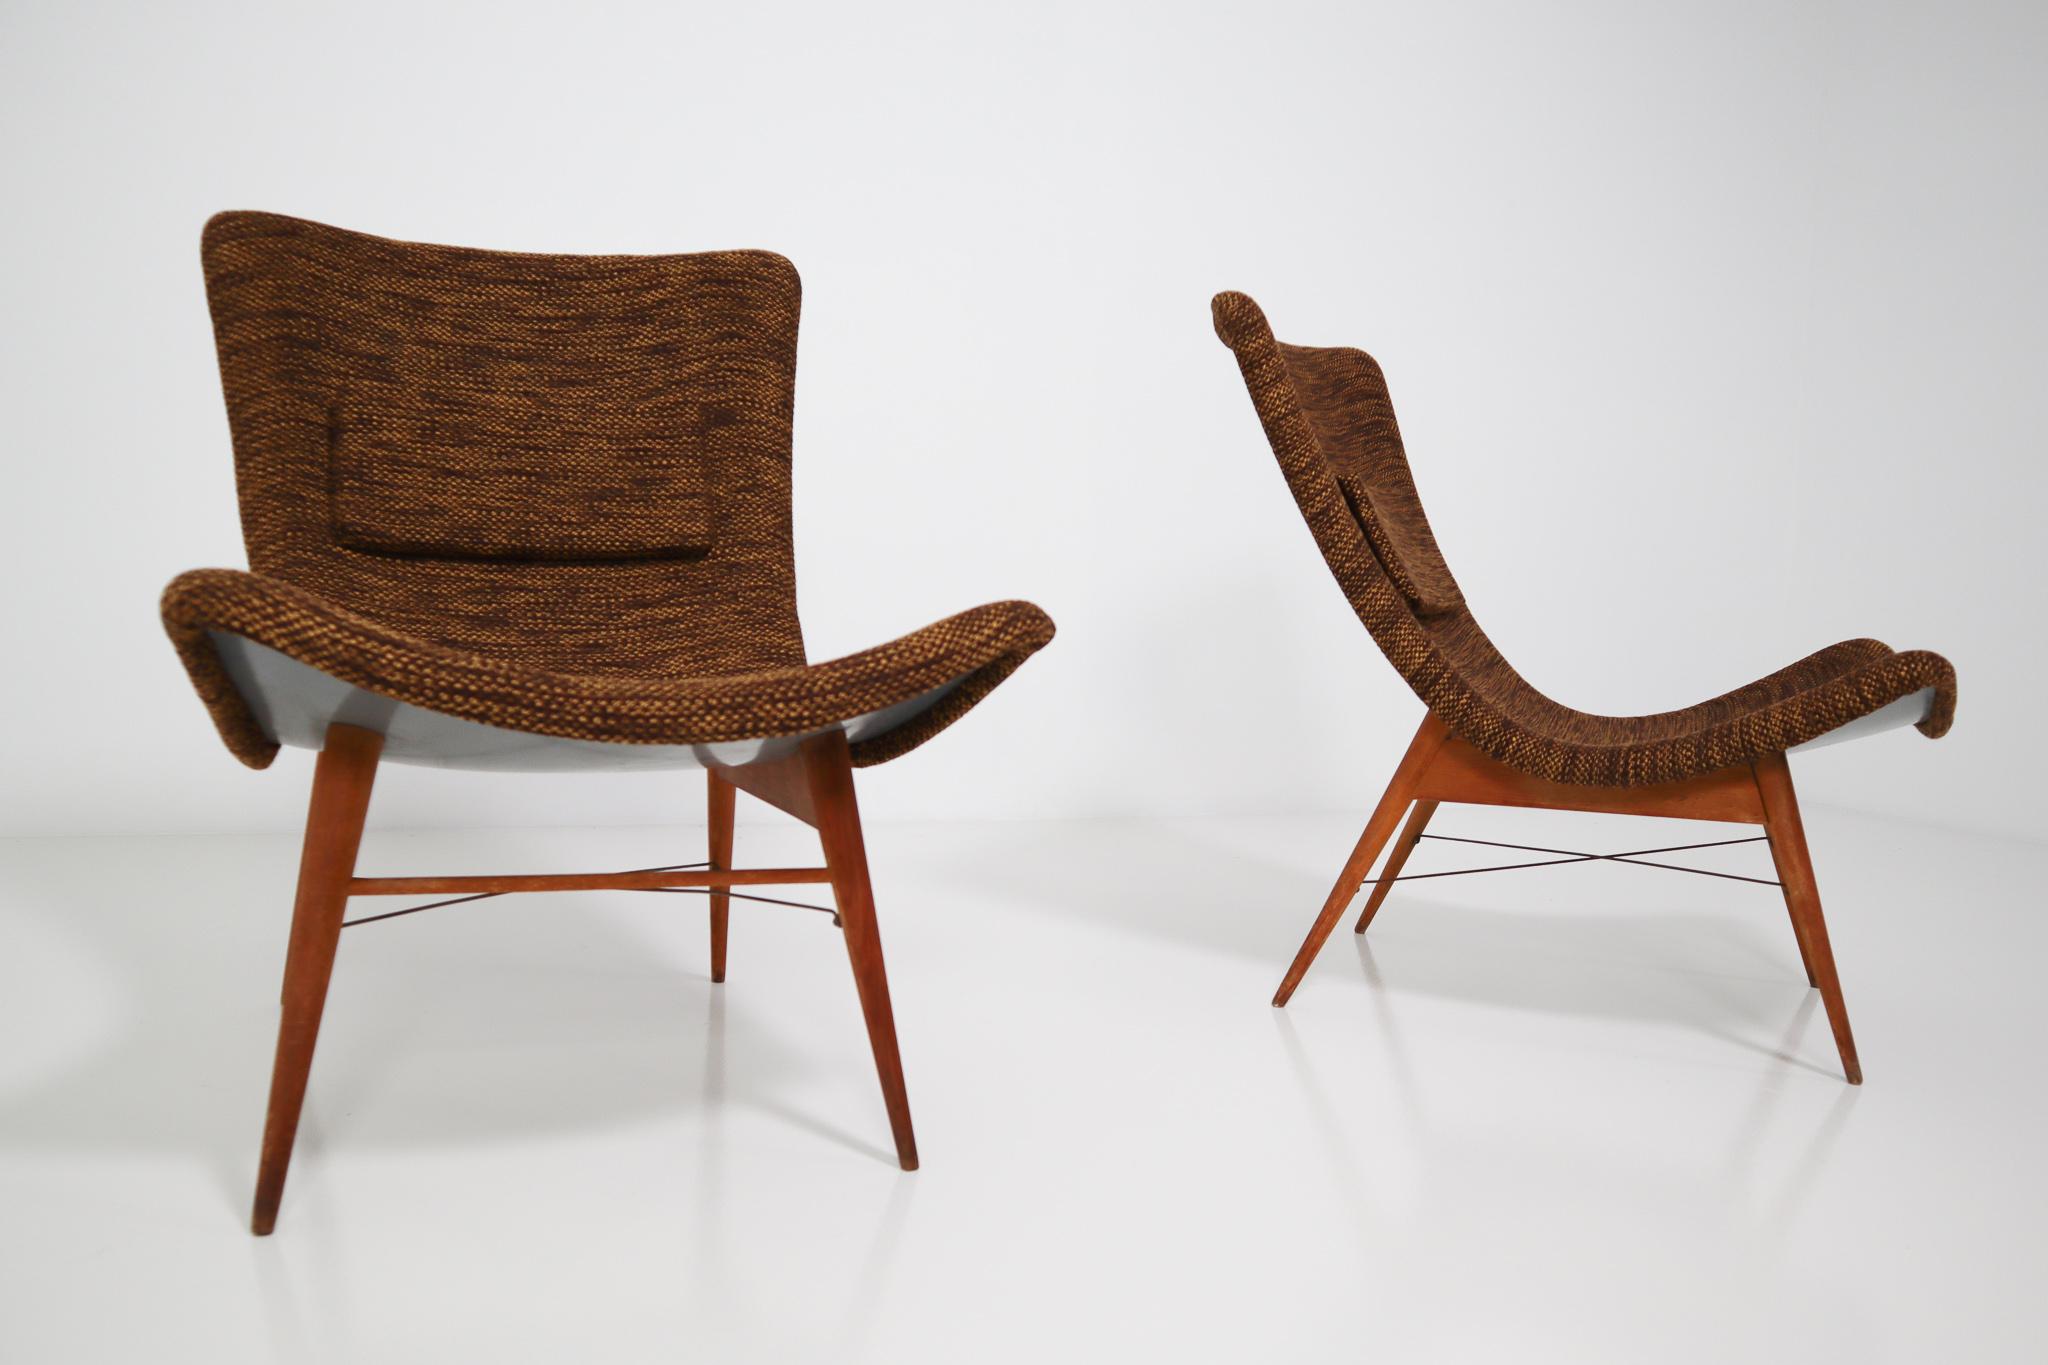 Lounge chairs by Miroslav Navratil, manufactured in former Czechoslovakia by Cesky Nabytek, 1959. Original wooden base, fiberglass shell seating. The backside of the chair is original grey color and have a new Reupholstered fabric in brown color.